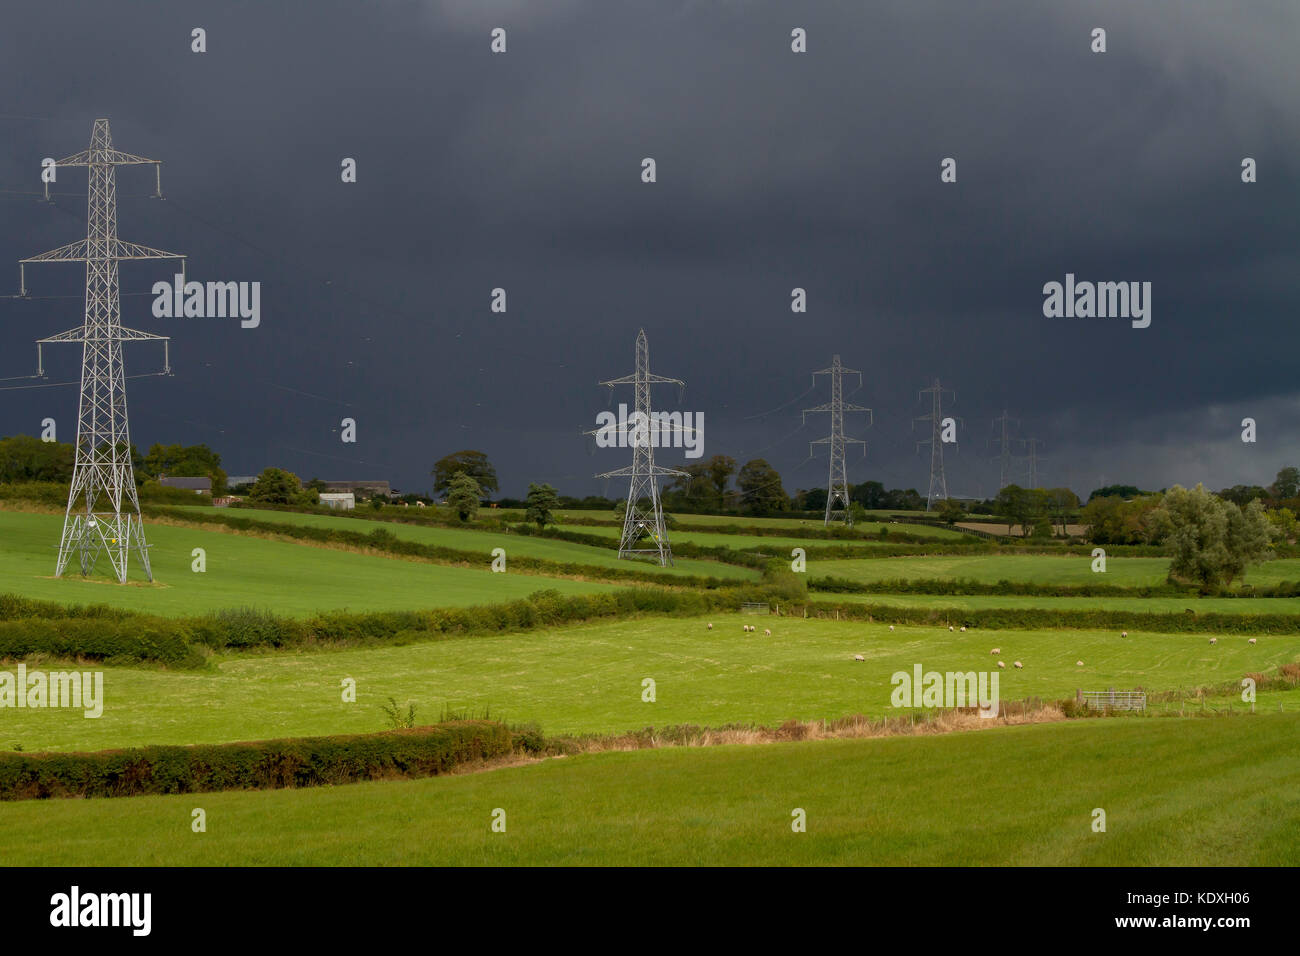 Overhead electricity power-lines and pylons in County Armagh, Northern Ireland. Stock Photo